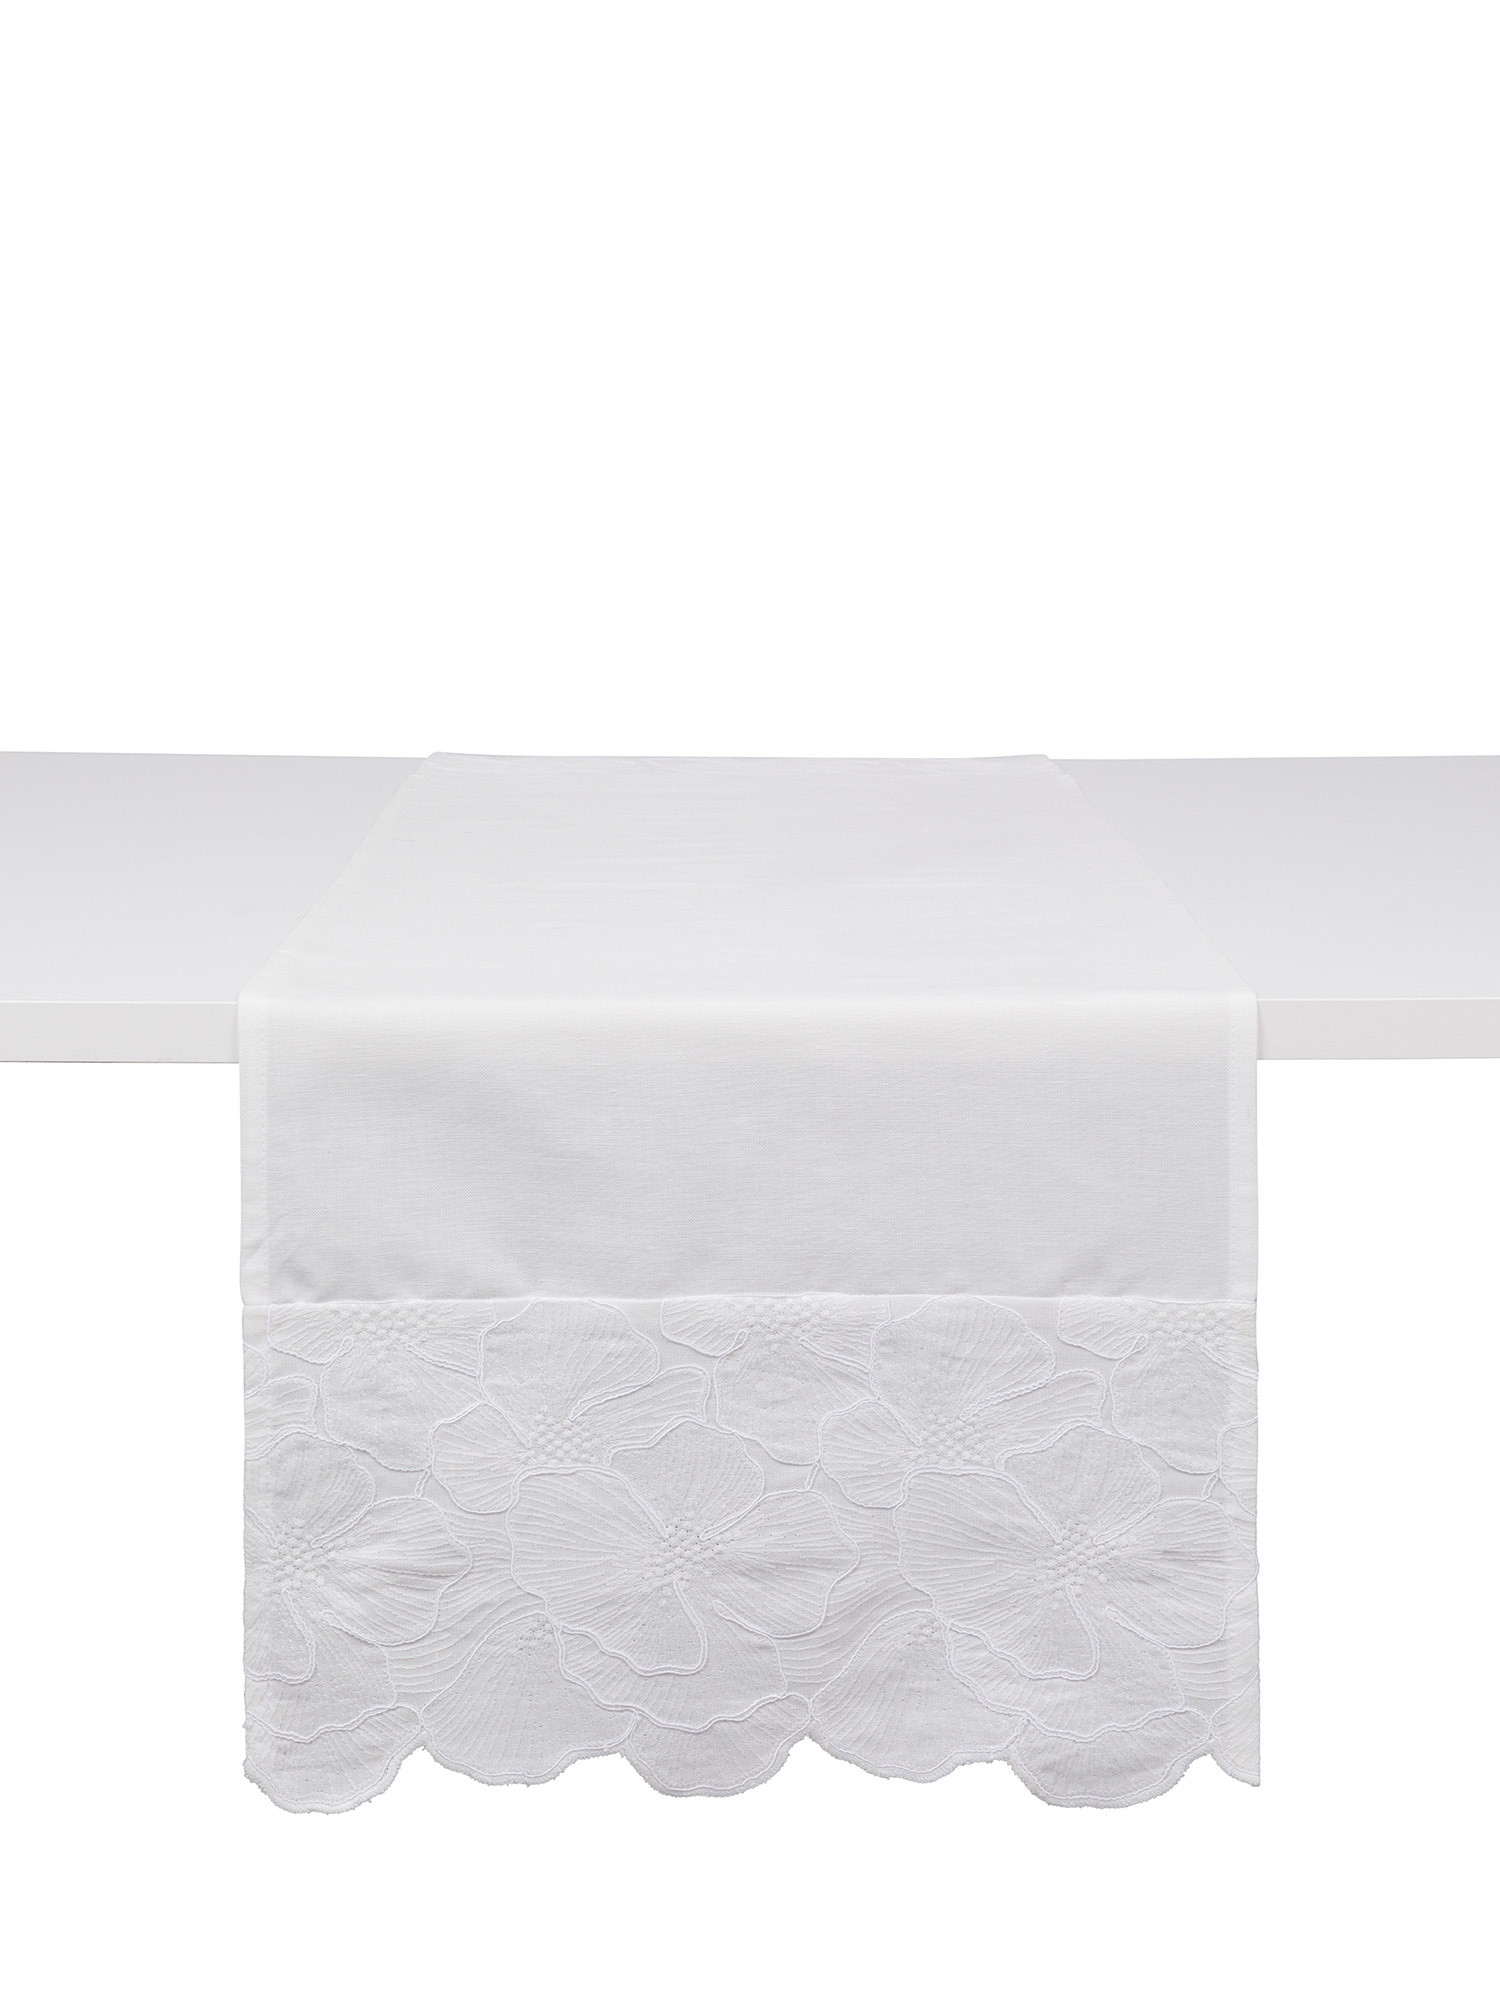 Linen and cotton runner with applied edge, White, large image number 0